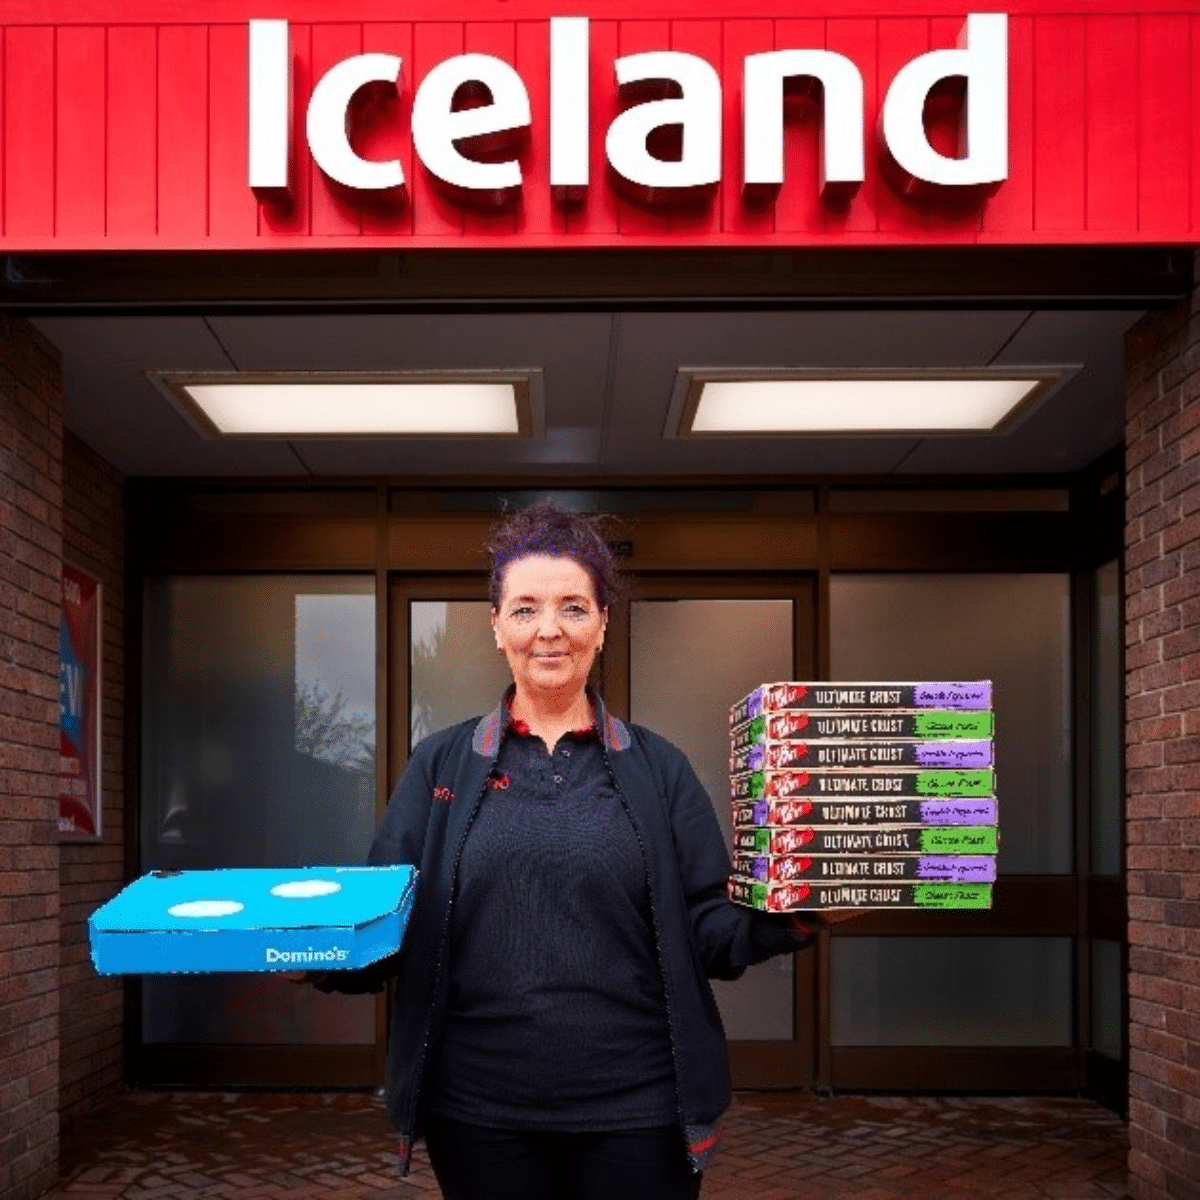 person standing outside an Iceland store. In their right hand, they are holding a Dominos pizza box. In their left hand, they are holding eight Iceland pizzas stacked up.